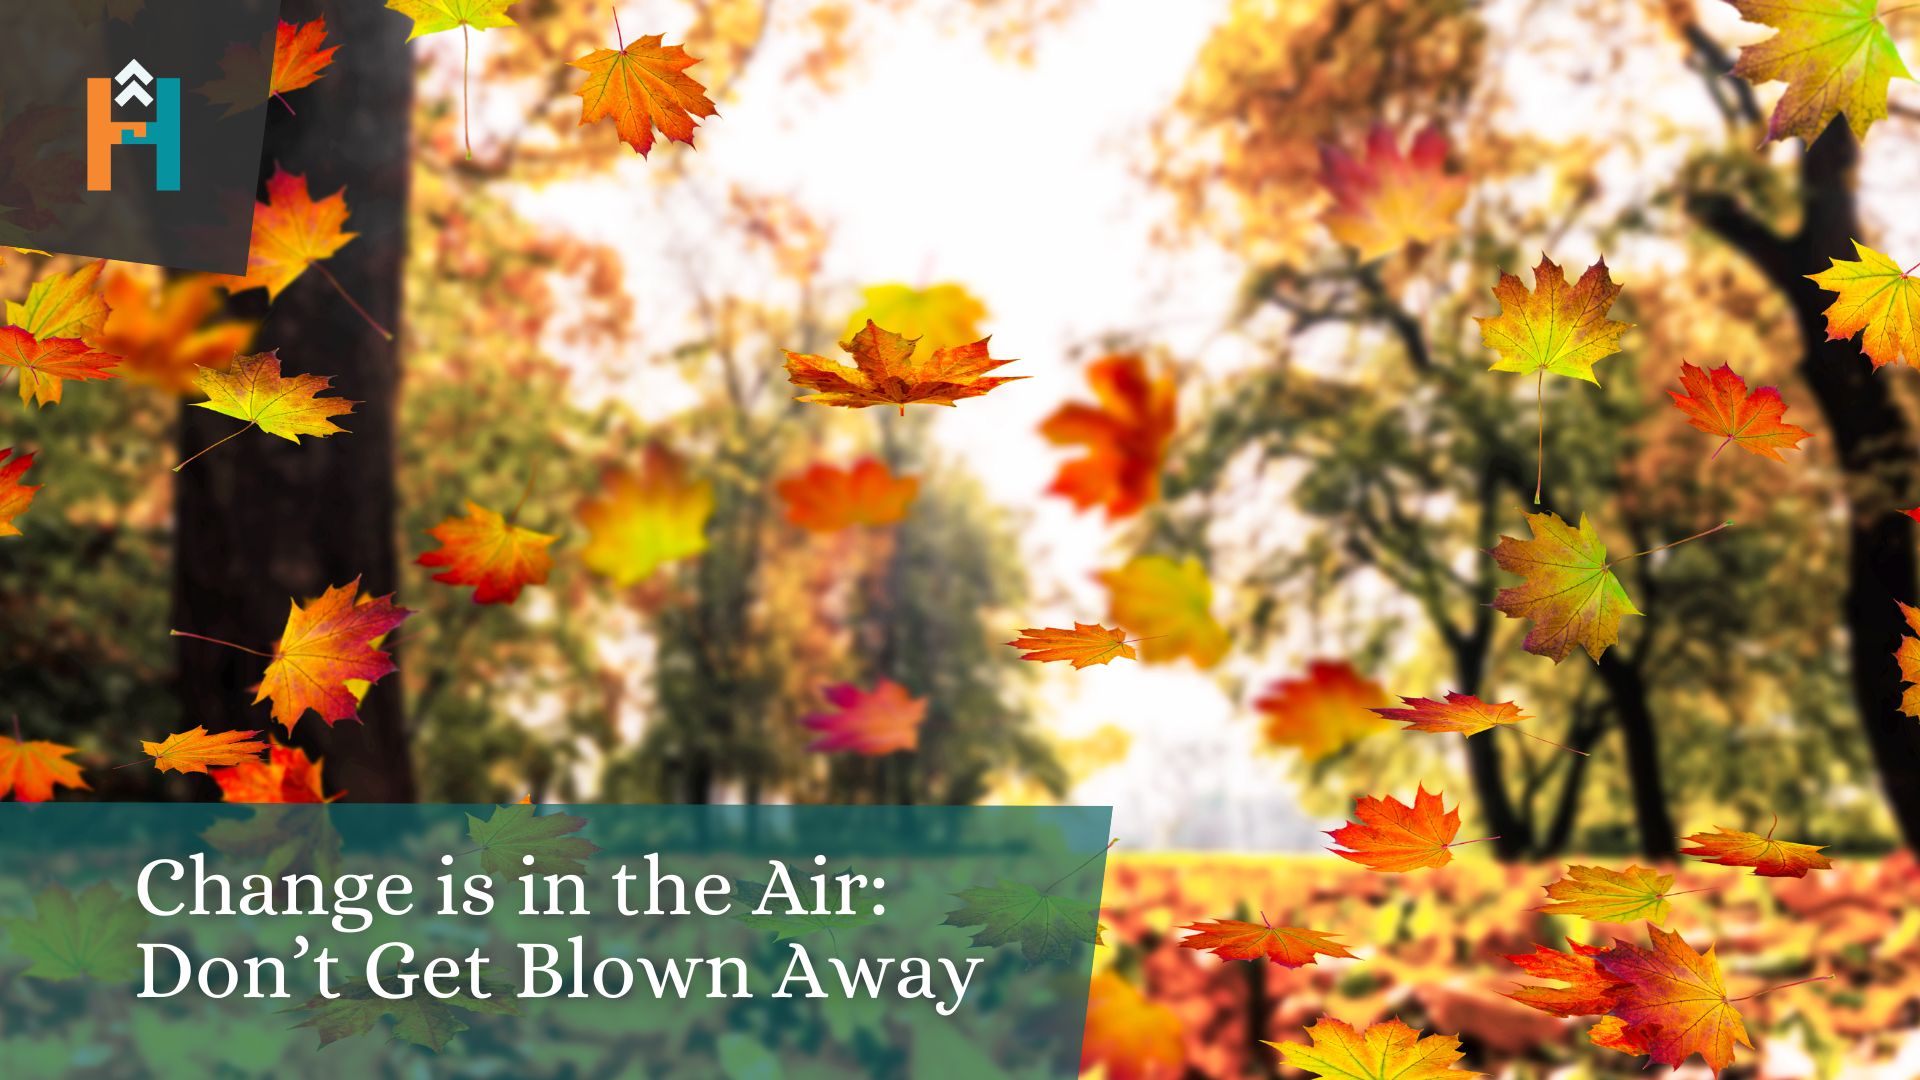 Change is in the Air: Don’t Get Blown Away